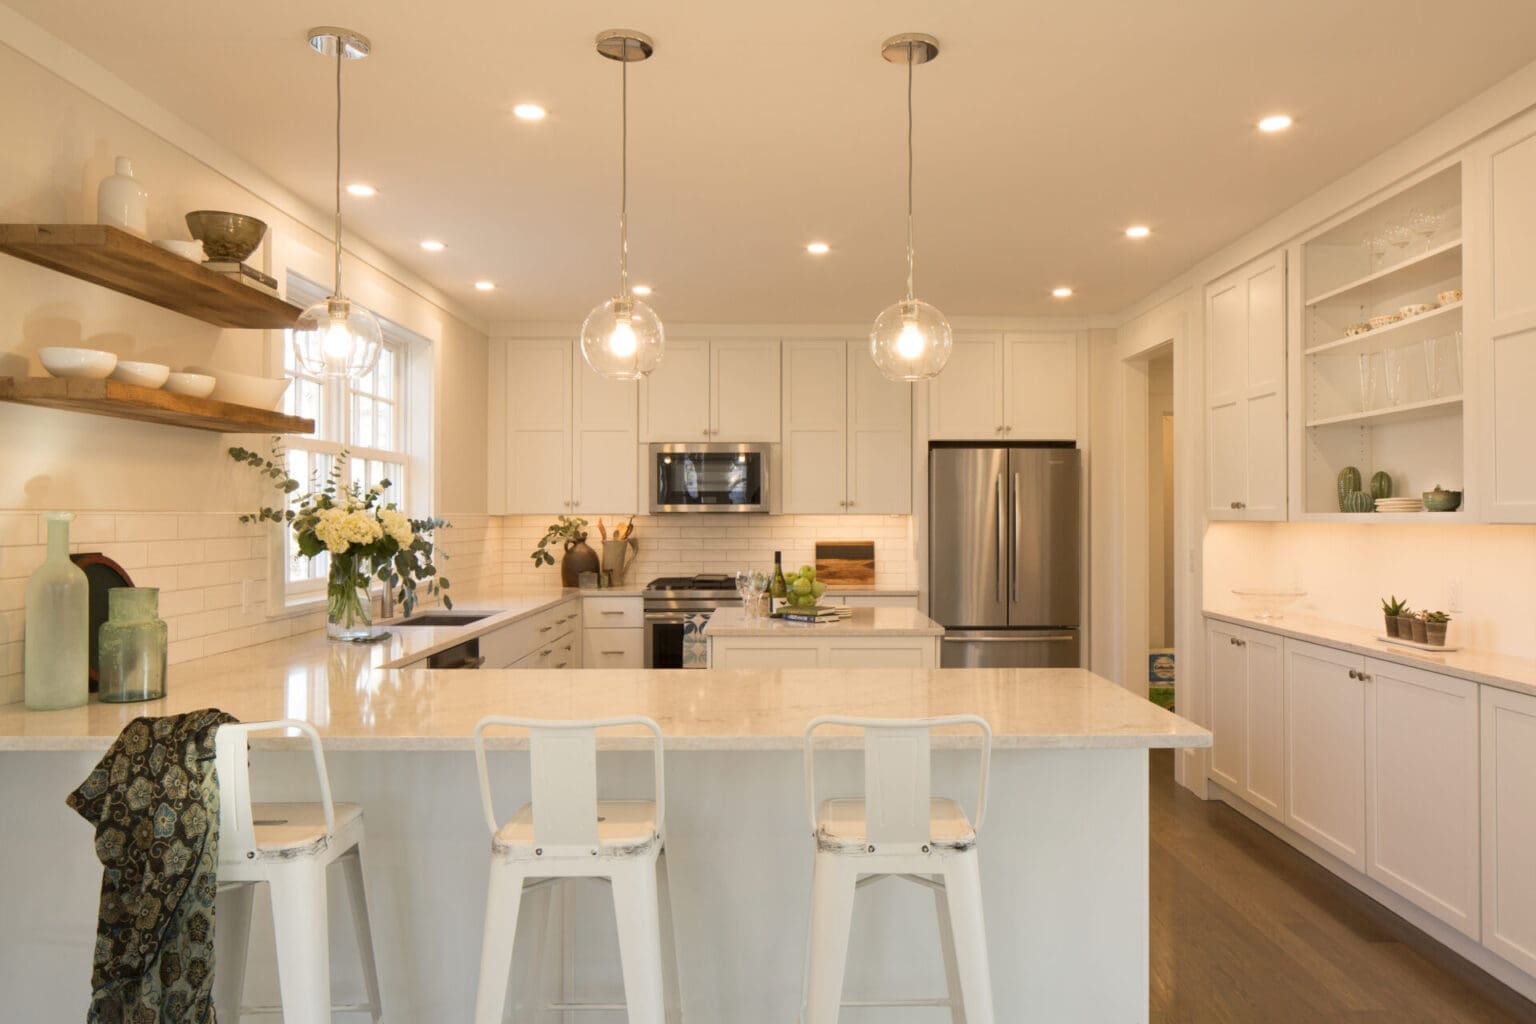 A photo of a kitchen with white painted shaker-style cabinets, three white counter-side chairs, stainless steel appliances, white subway tile backsplash, wooden shelves, light grey marble countertops, and an island.